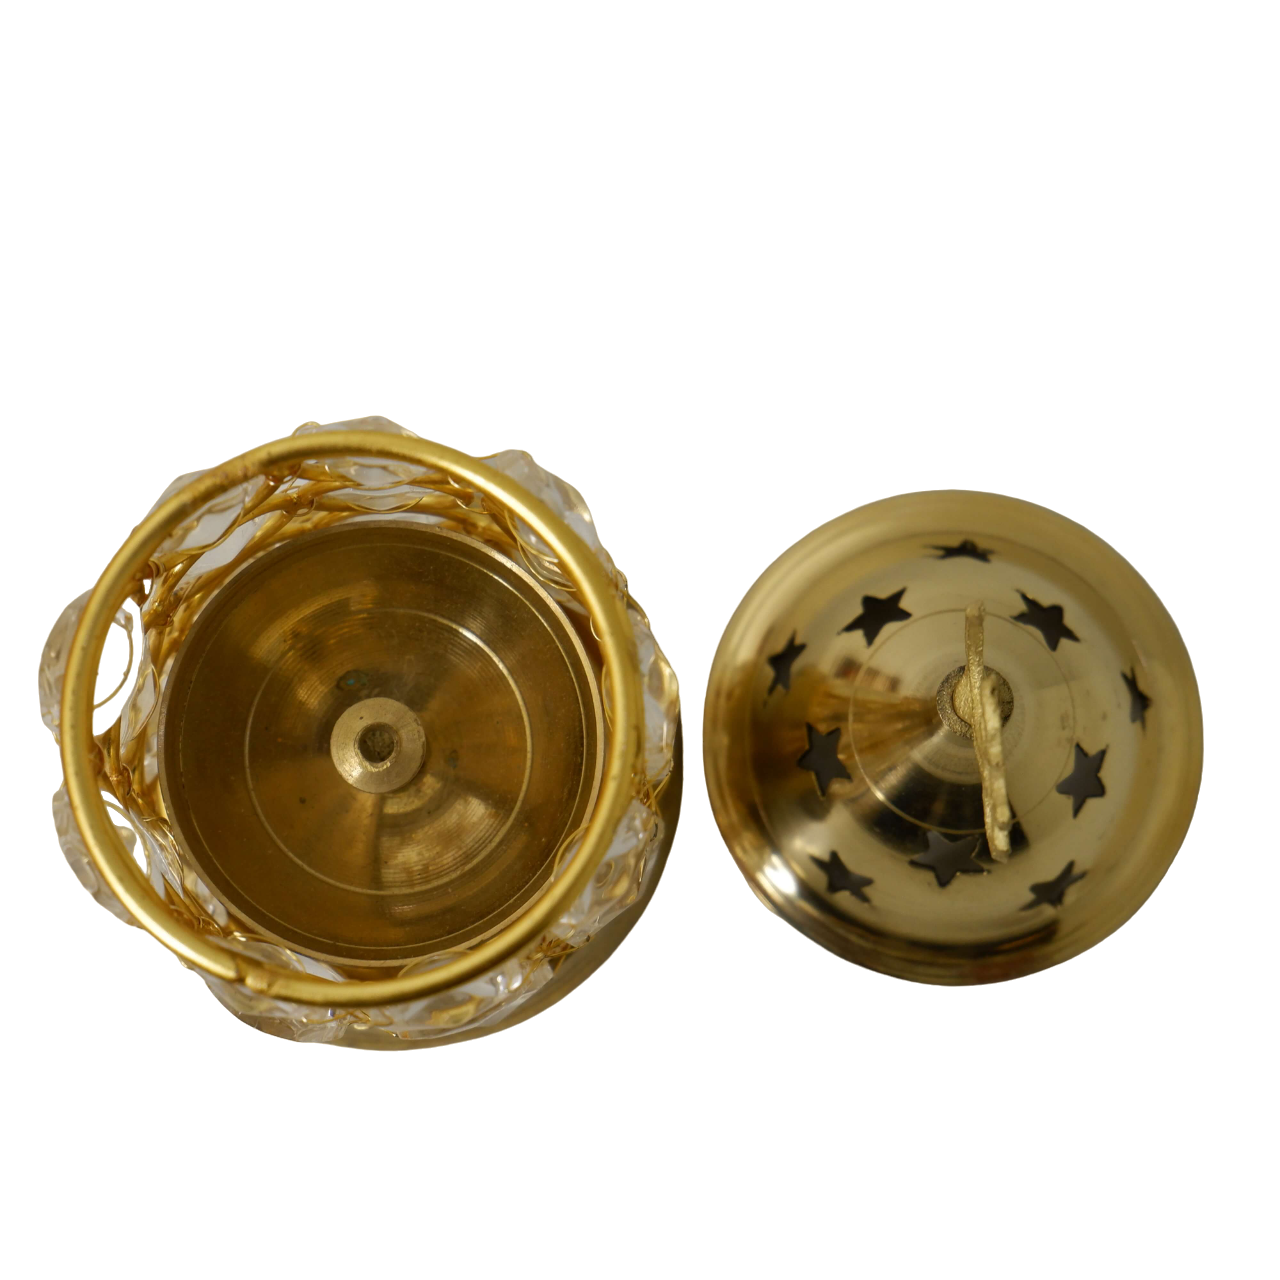 Brass Dipak with Crystal Pillar Cover and Om Top (Large)